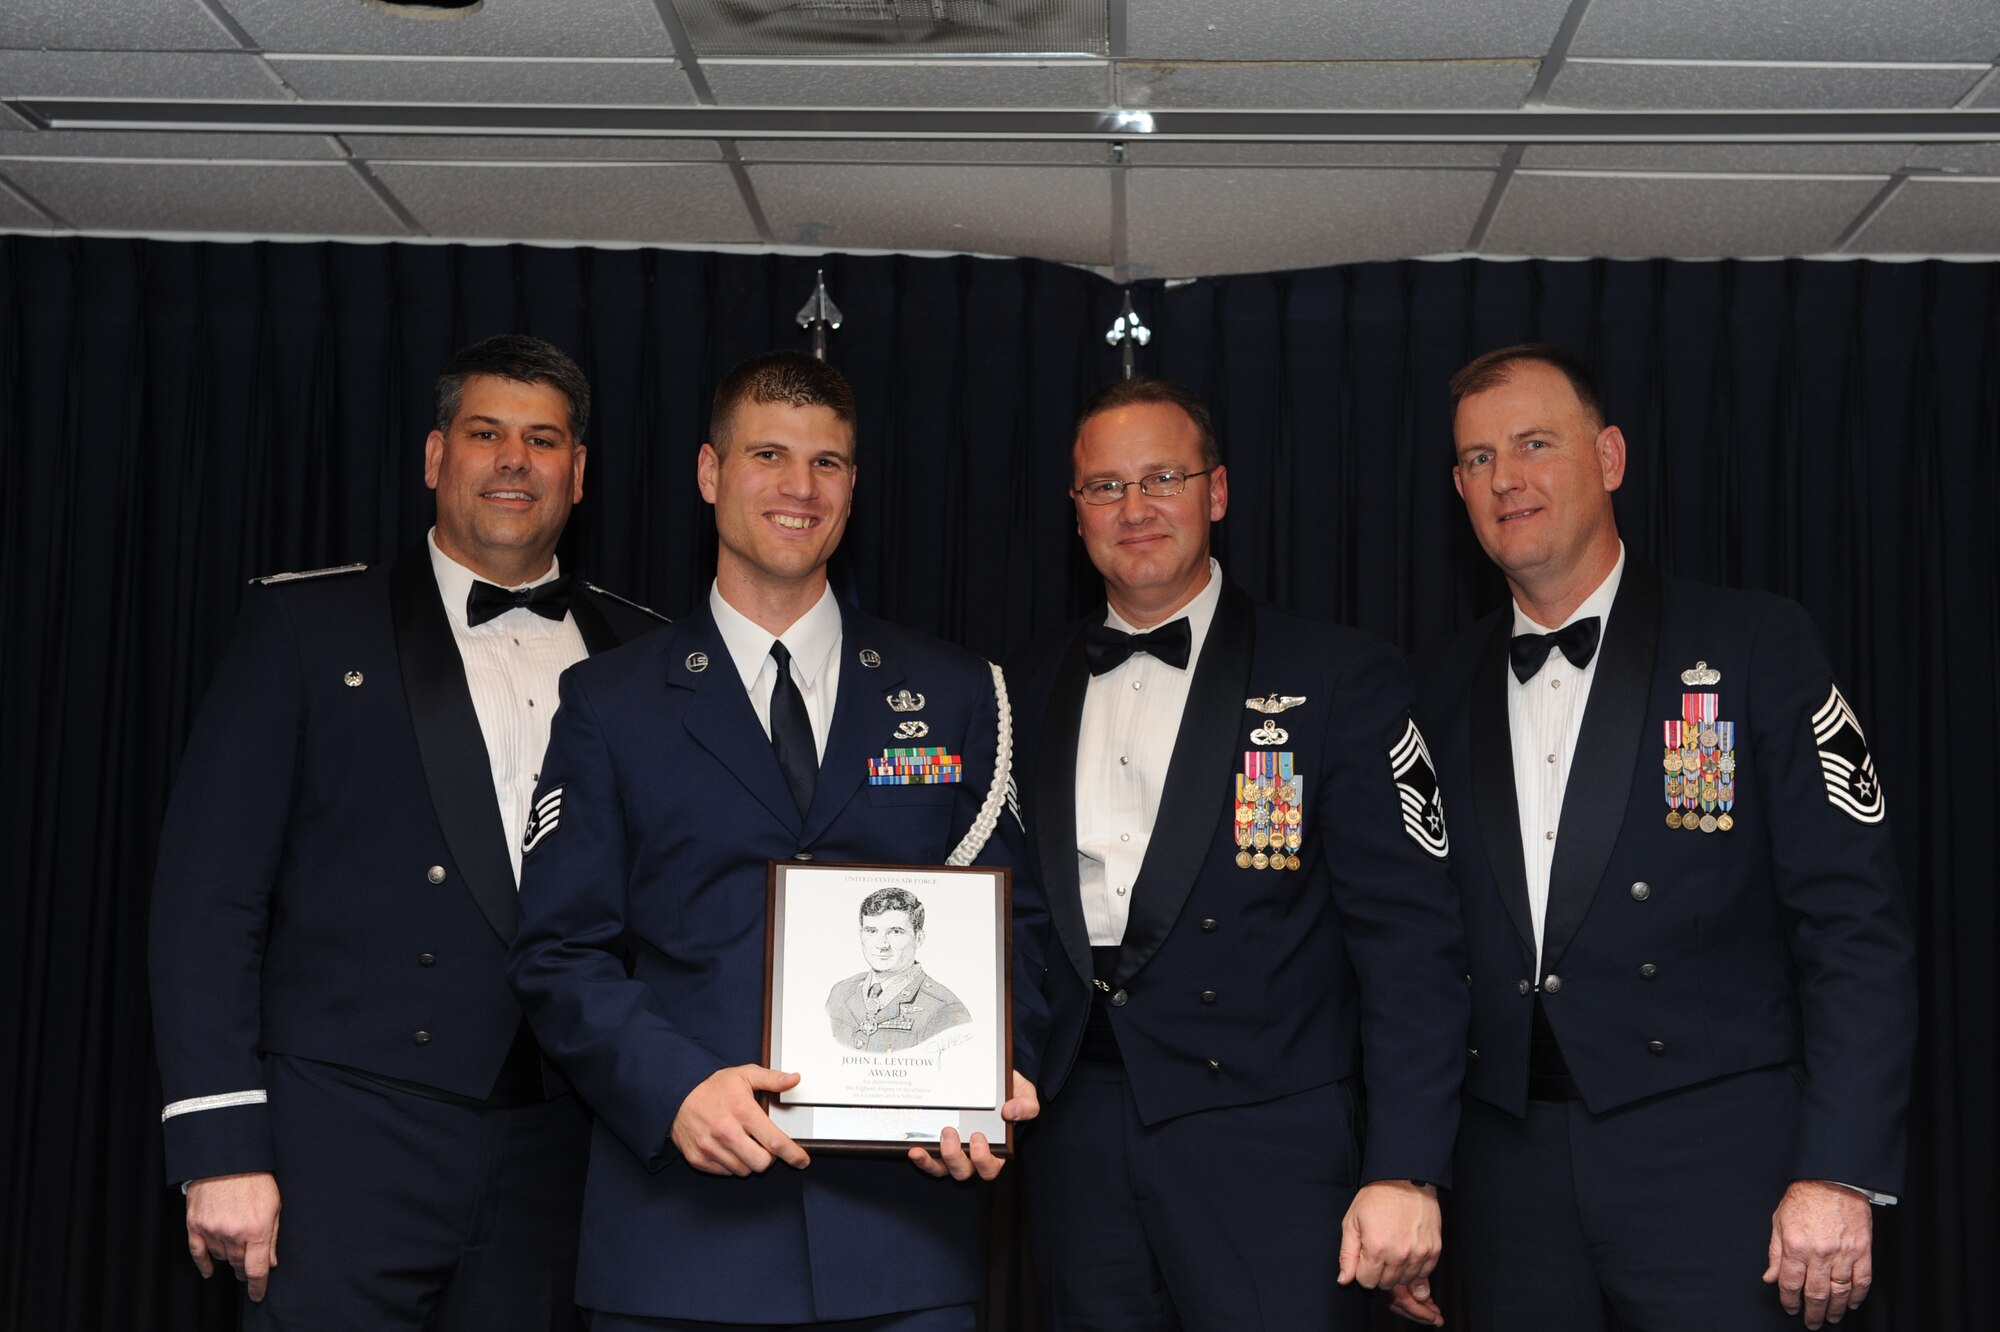 Staff Sgt. Paul Brow, 19th Civil Engineer Squadron, receives the John Levitow Award from base leaders Dec. 17 during the Airman Leadership Class graduation ceremony. The Levitow Award is presented to the top graduate of each ALS class. (U.S. Air Force Photo by Senior Airman Ethan Morgan)
